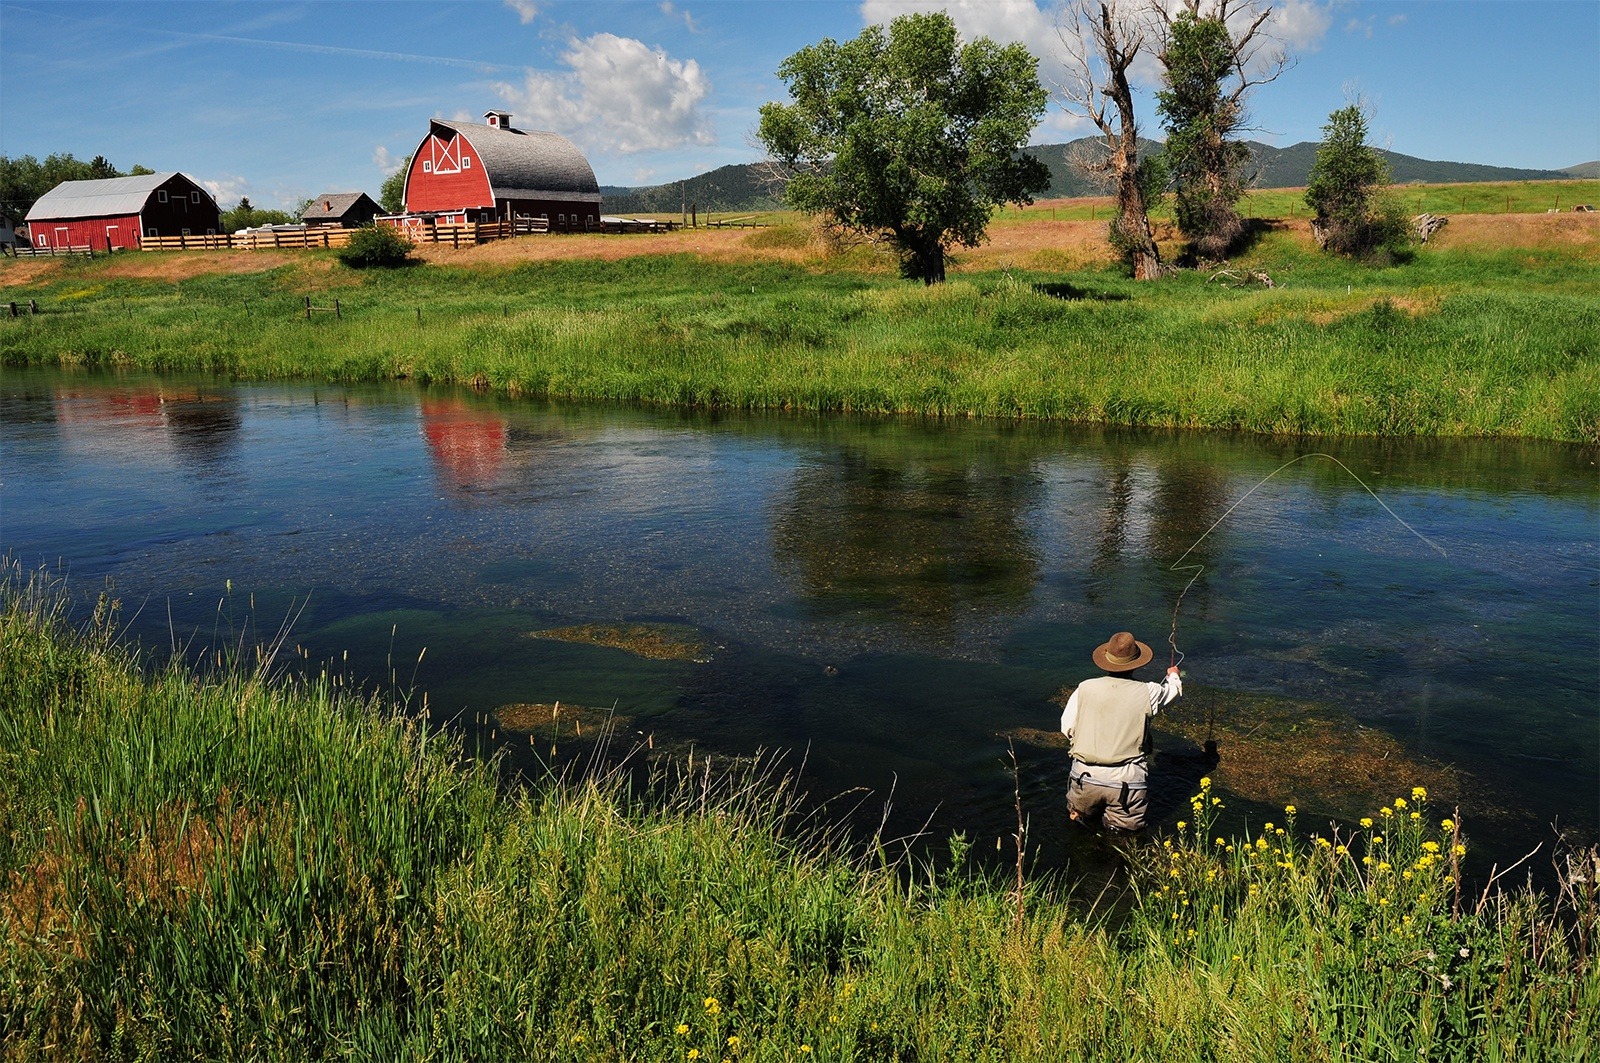 A lush green day. A person is fishing in a stream with a red barn in the background.